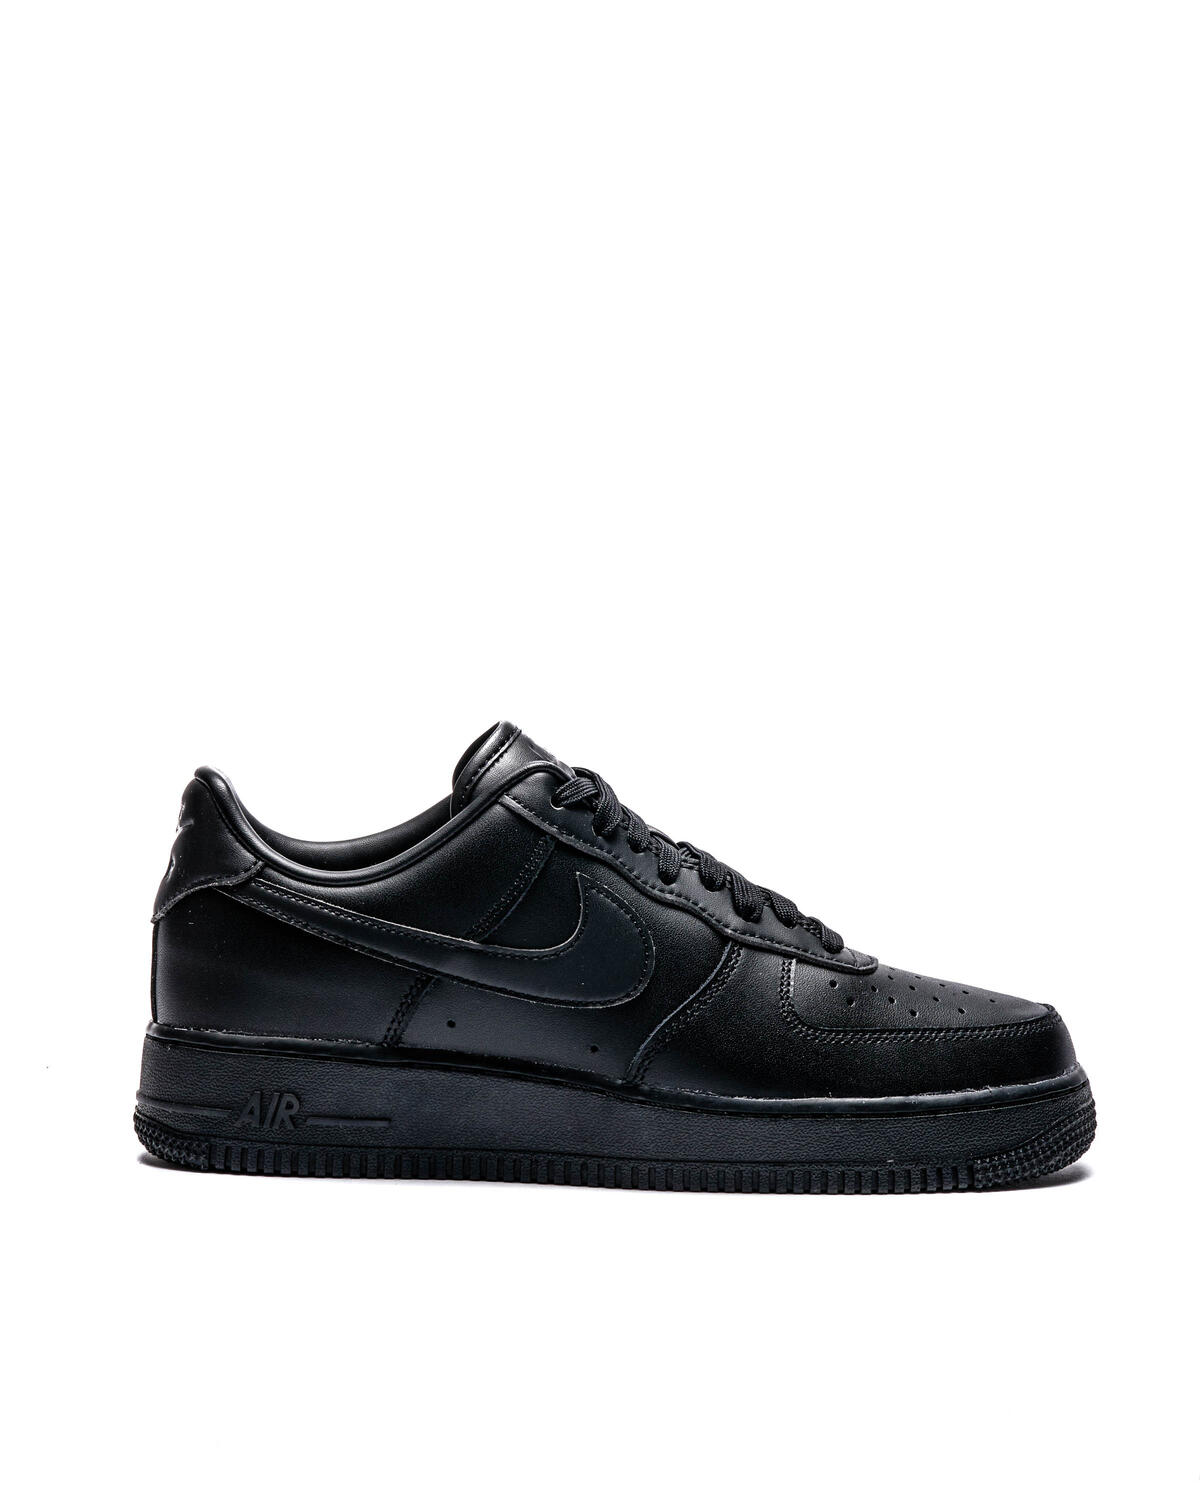 AIR FORCE 1 '07 | DM0211-001 | AFEW STORE